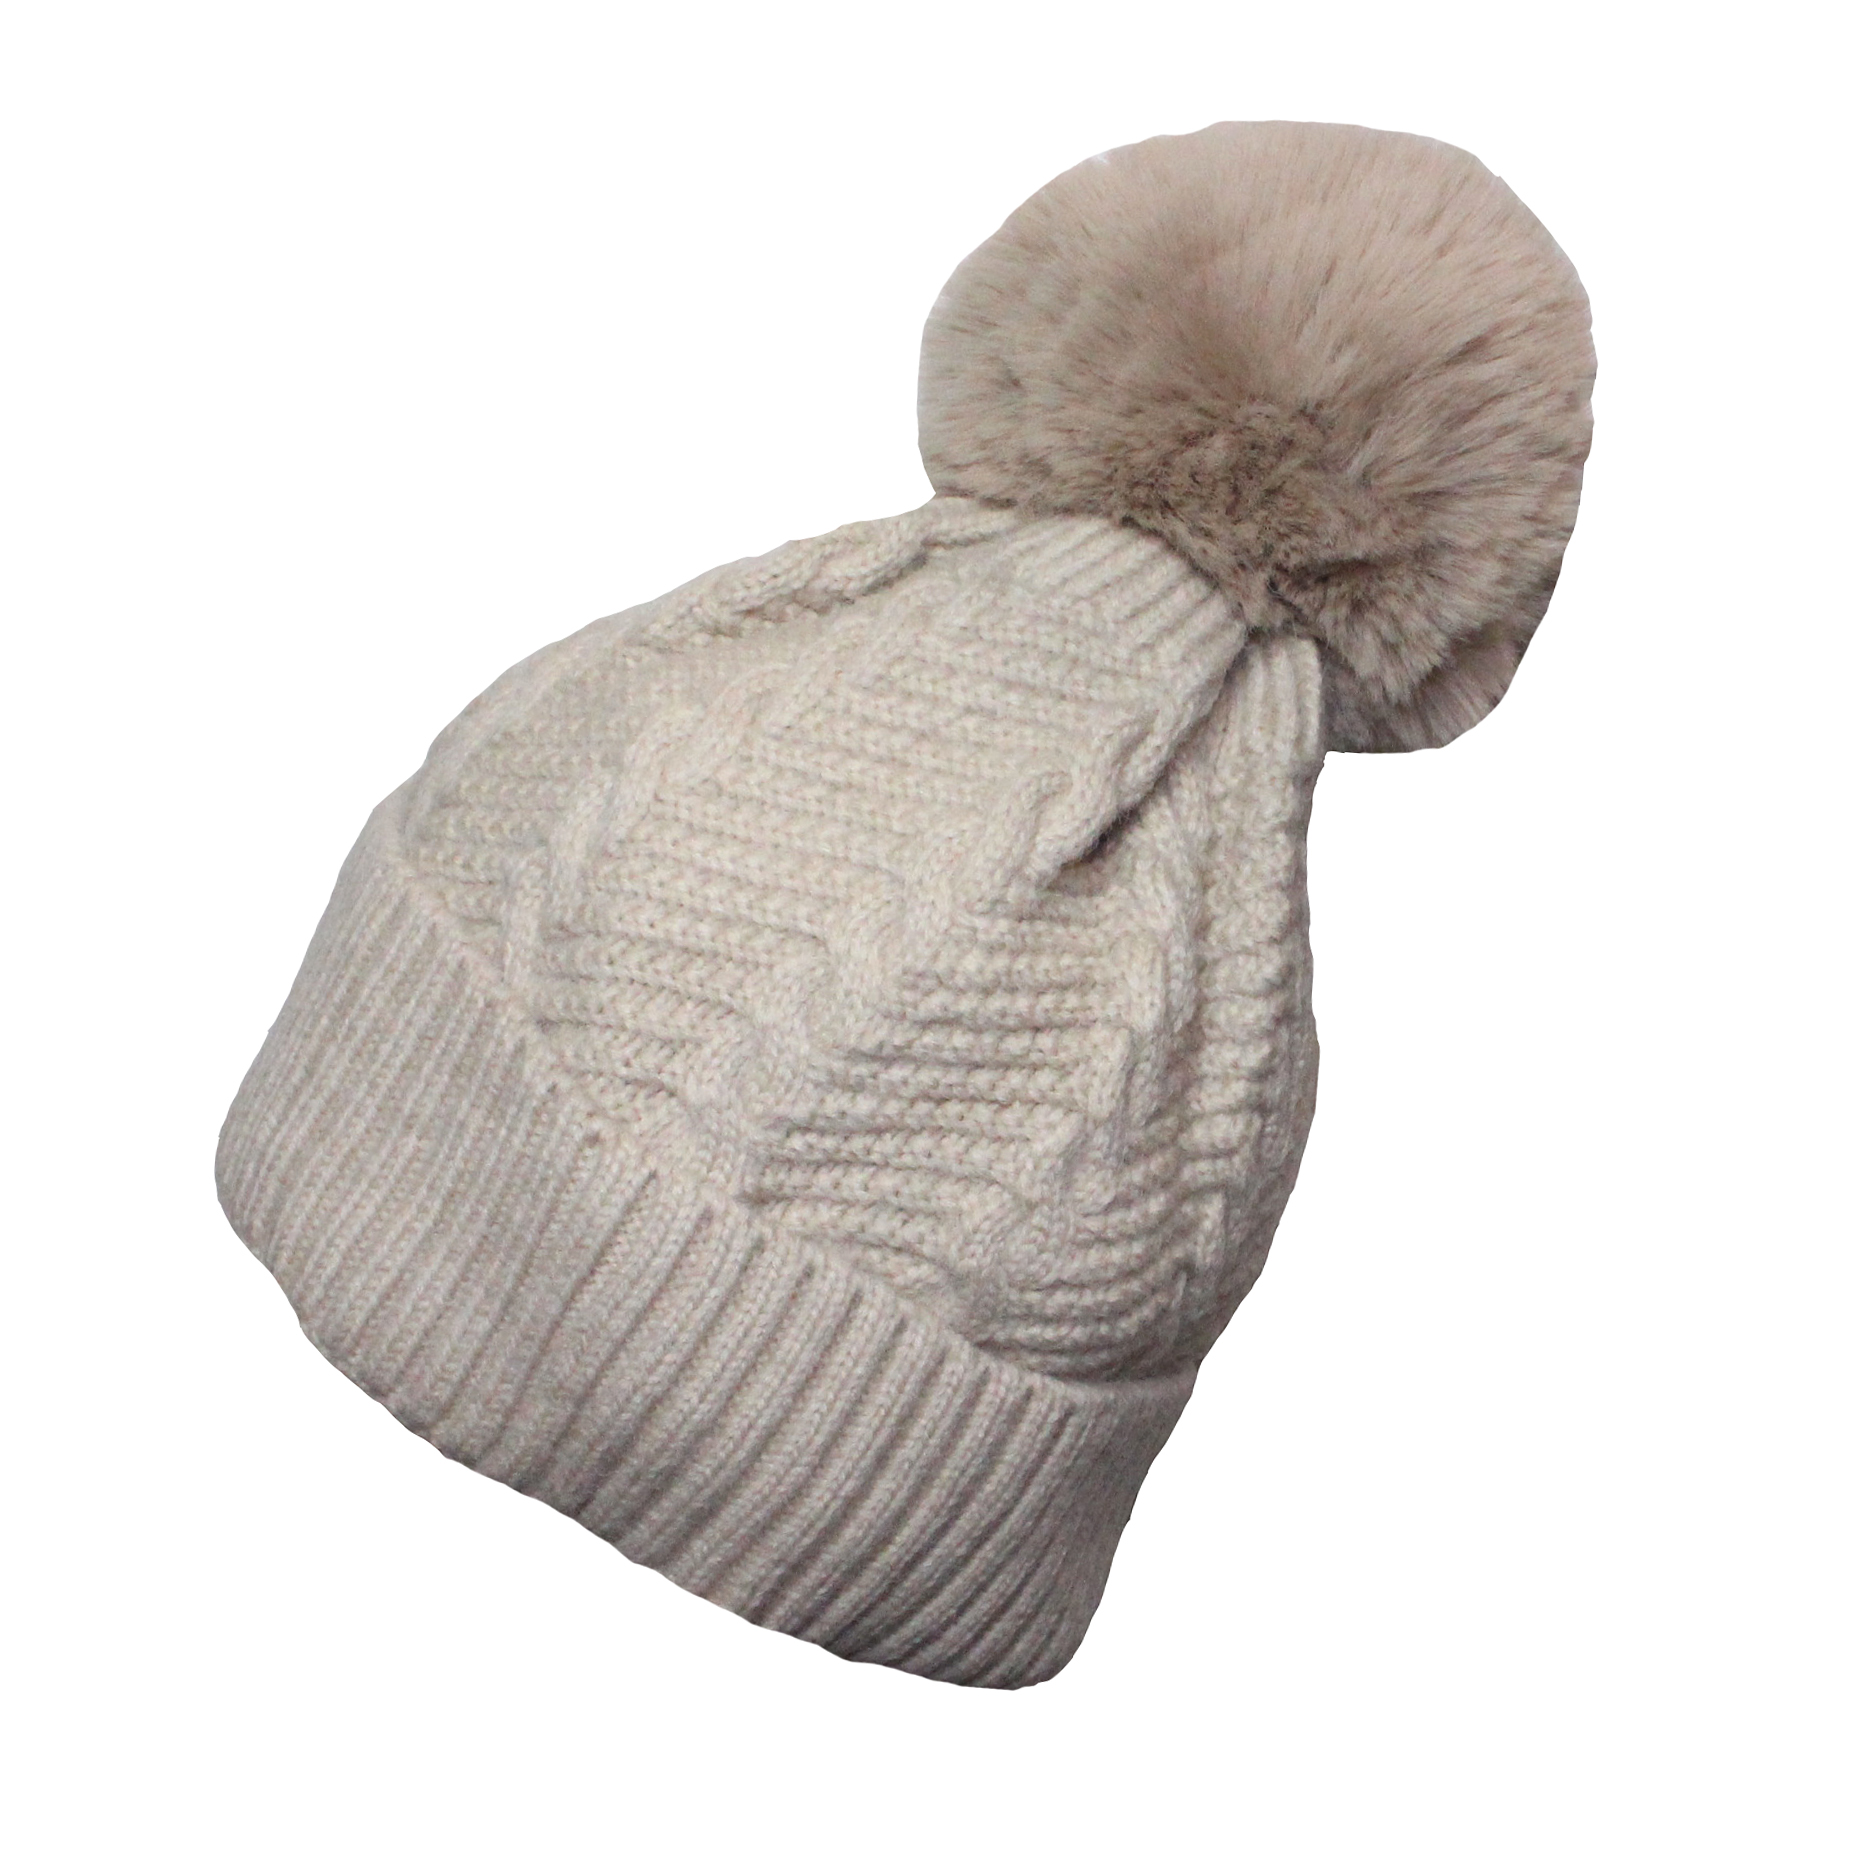 Knitted Mohair Hat with Pom Pom Off-White with Sparkle!